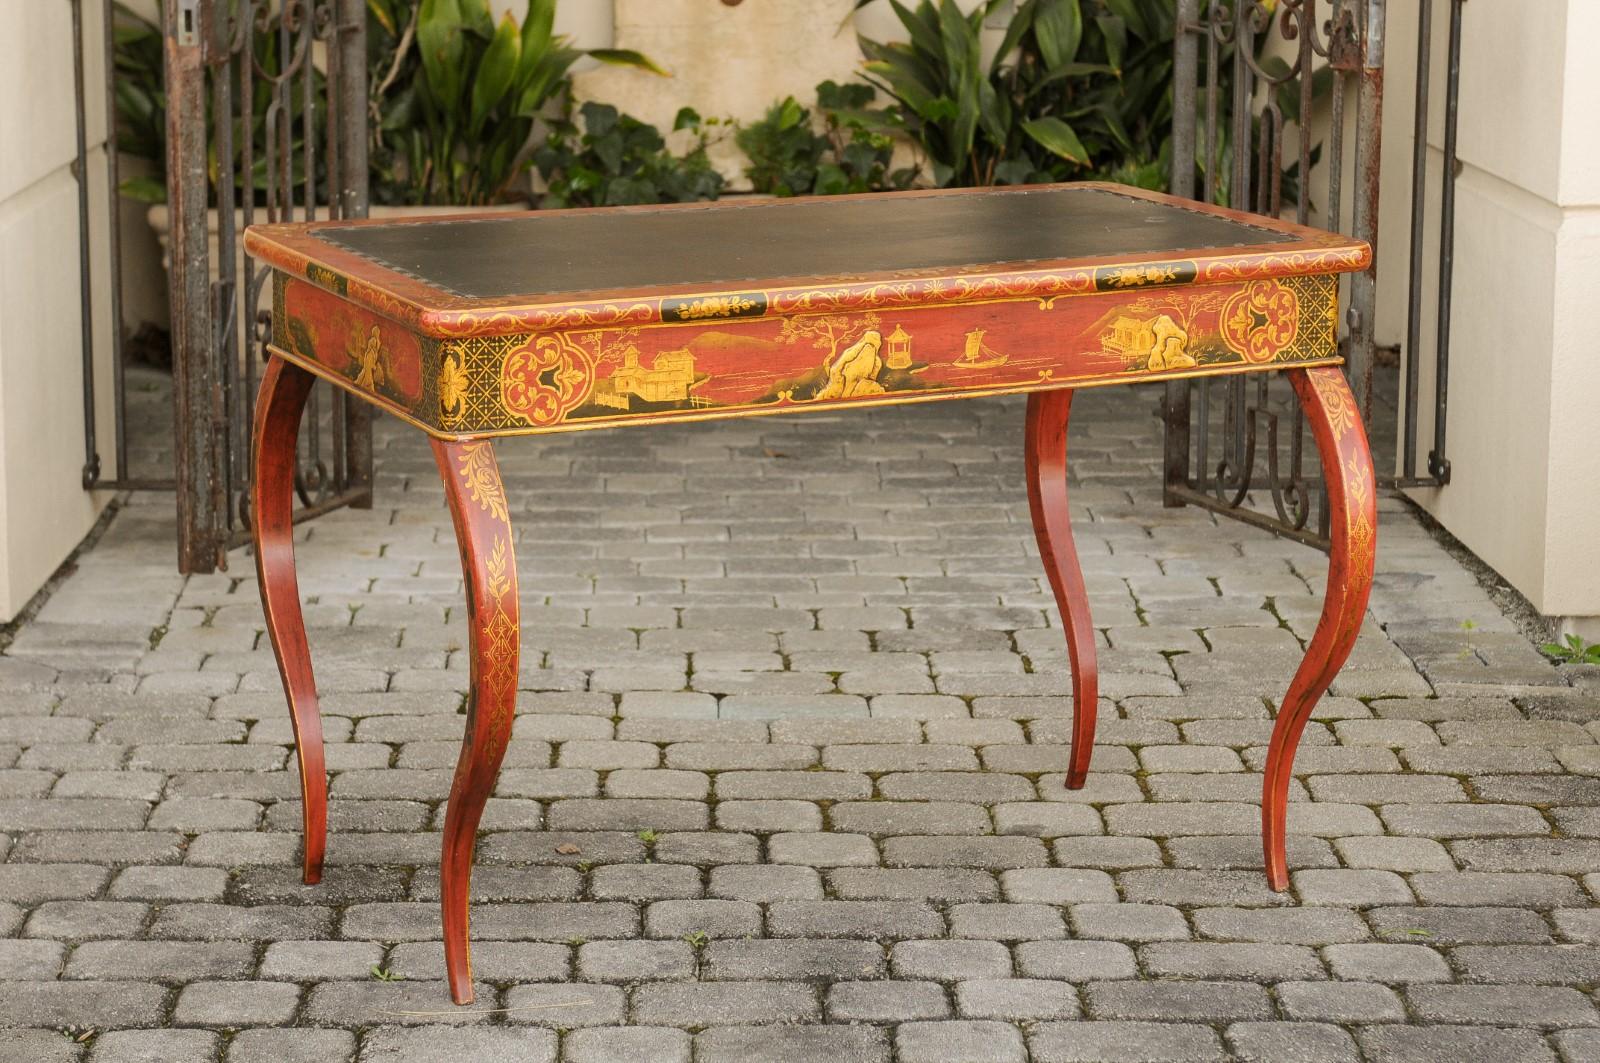 English Regency 1820s Table with Red Lacquered, Gold and Black Chinoiserie Decor For Sale 2